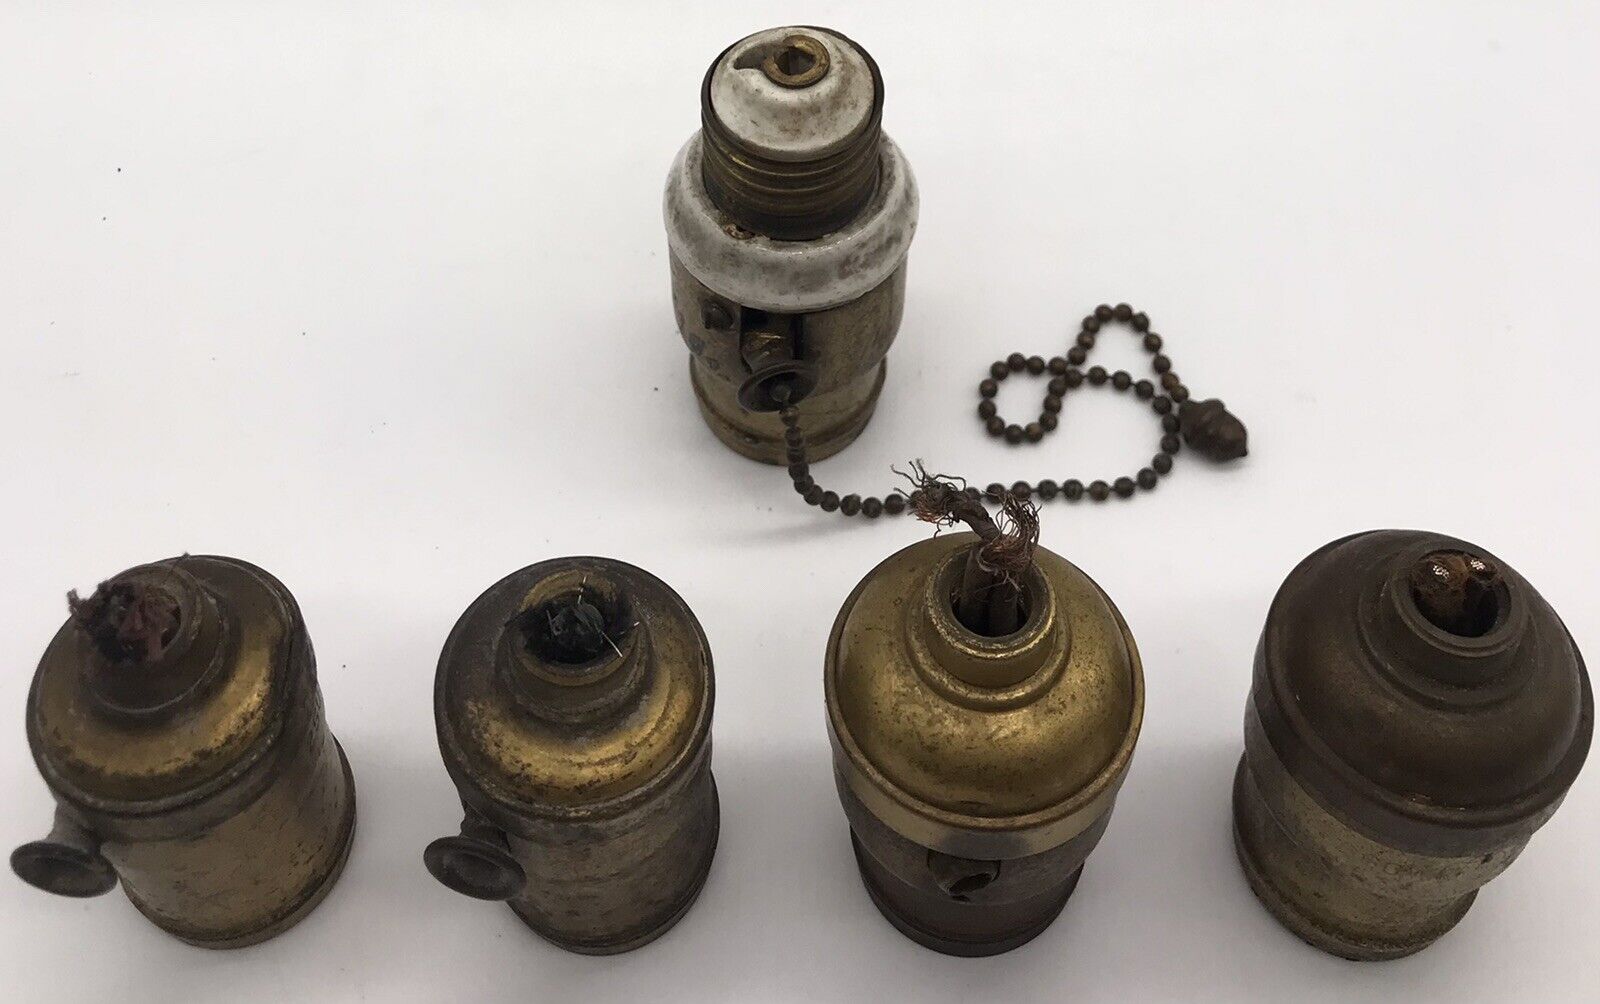 5 VINTAGE HUBBELL BRASS AND PORCELAIN LIGHT SOCKETS/PULL CHAIN.